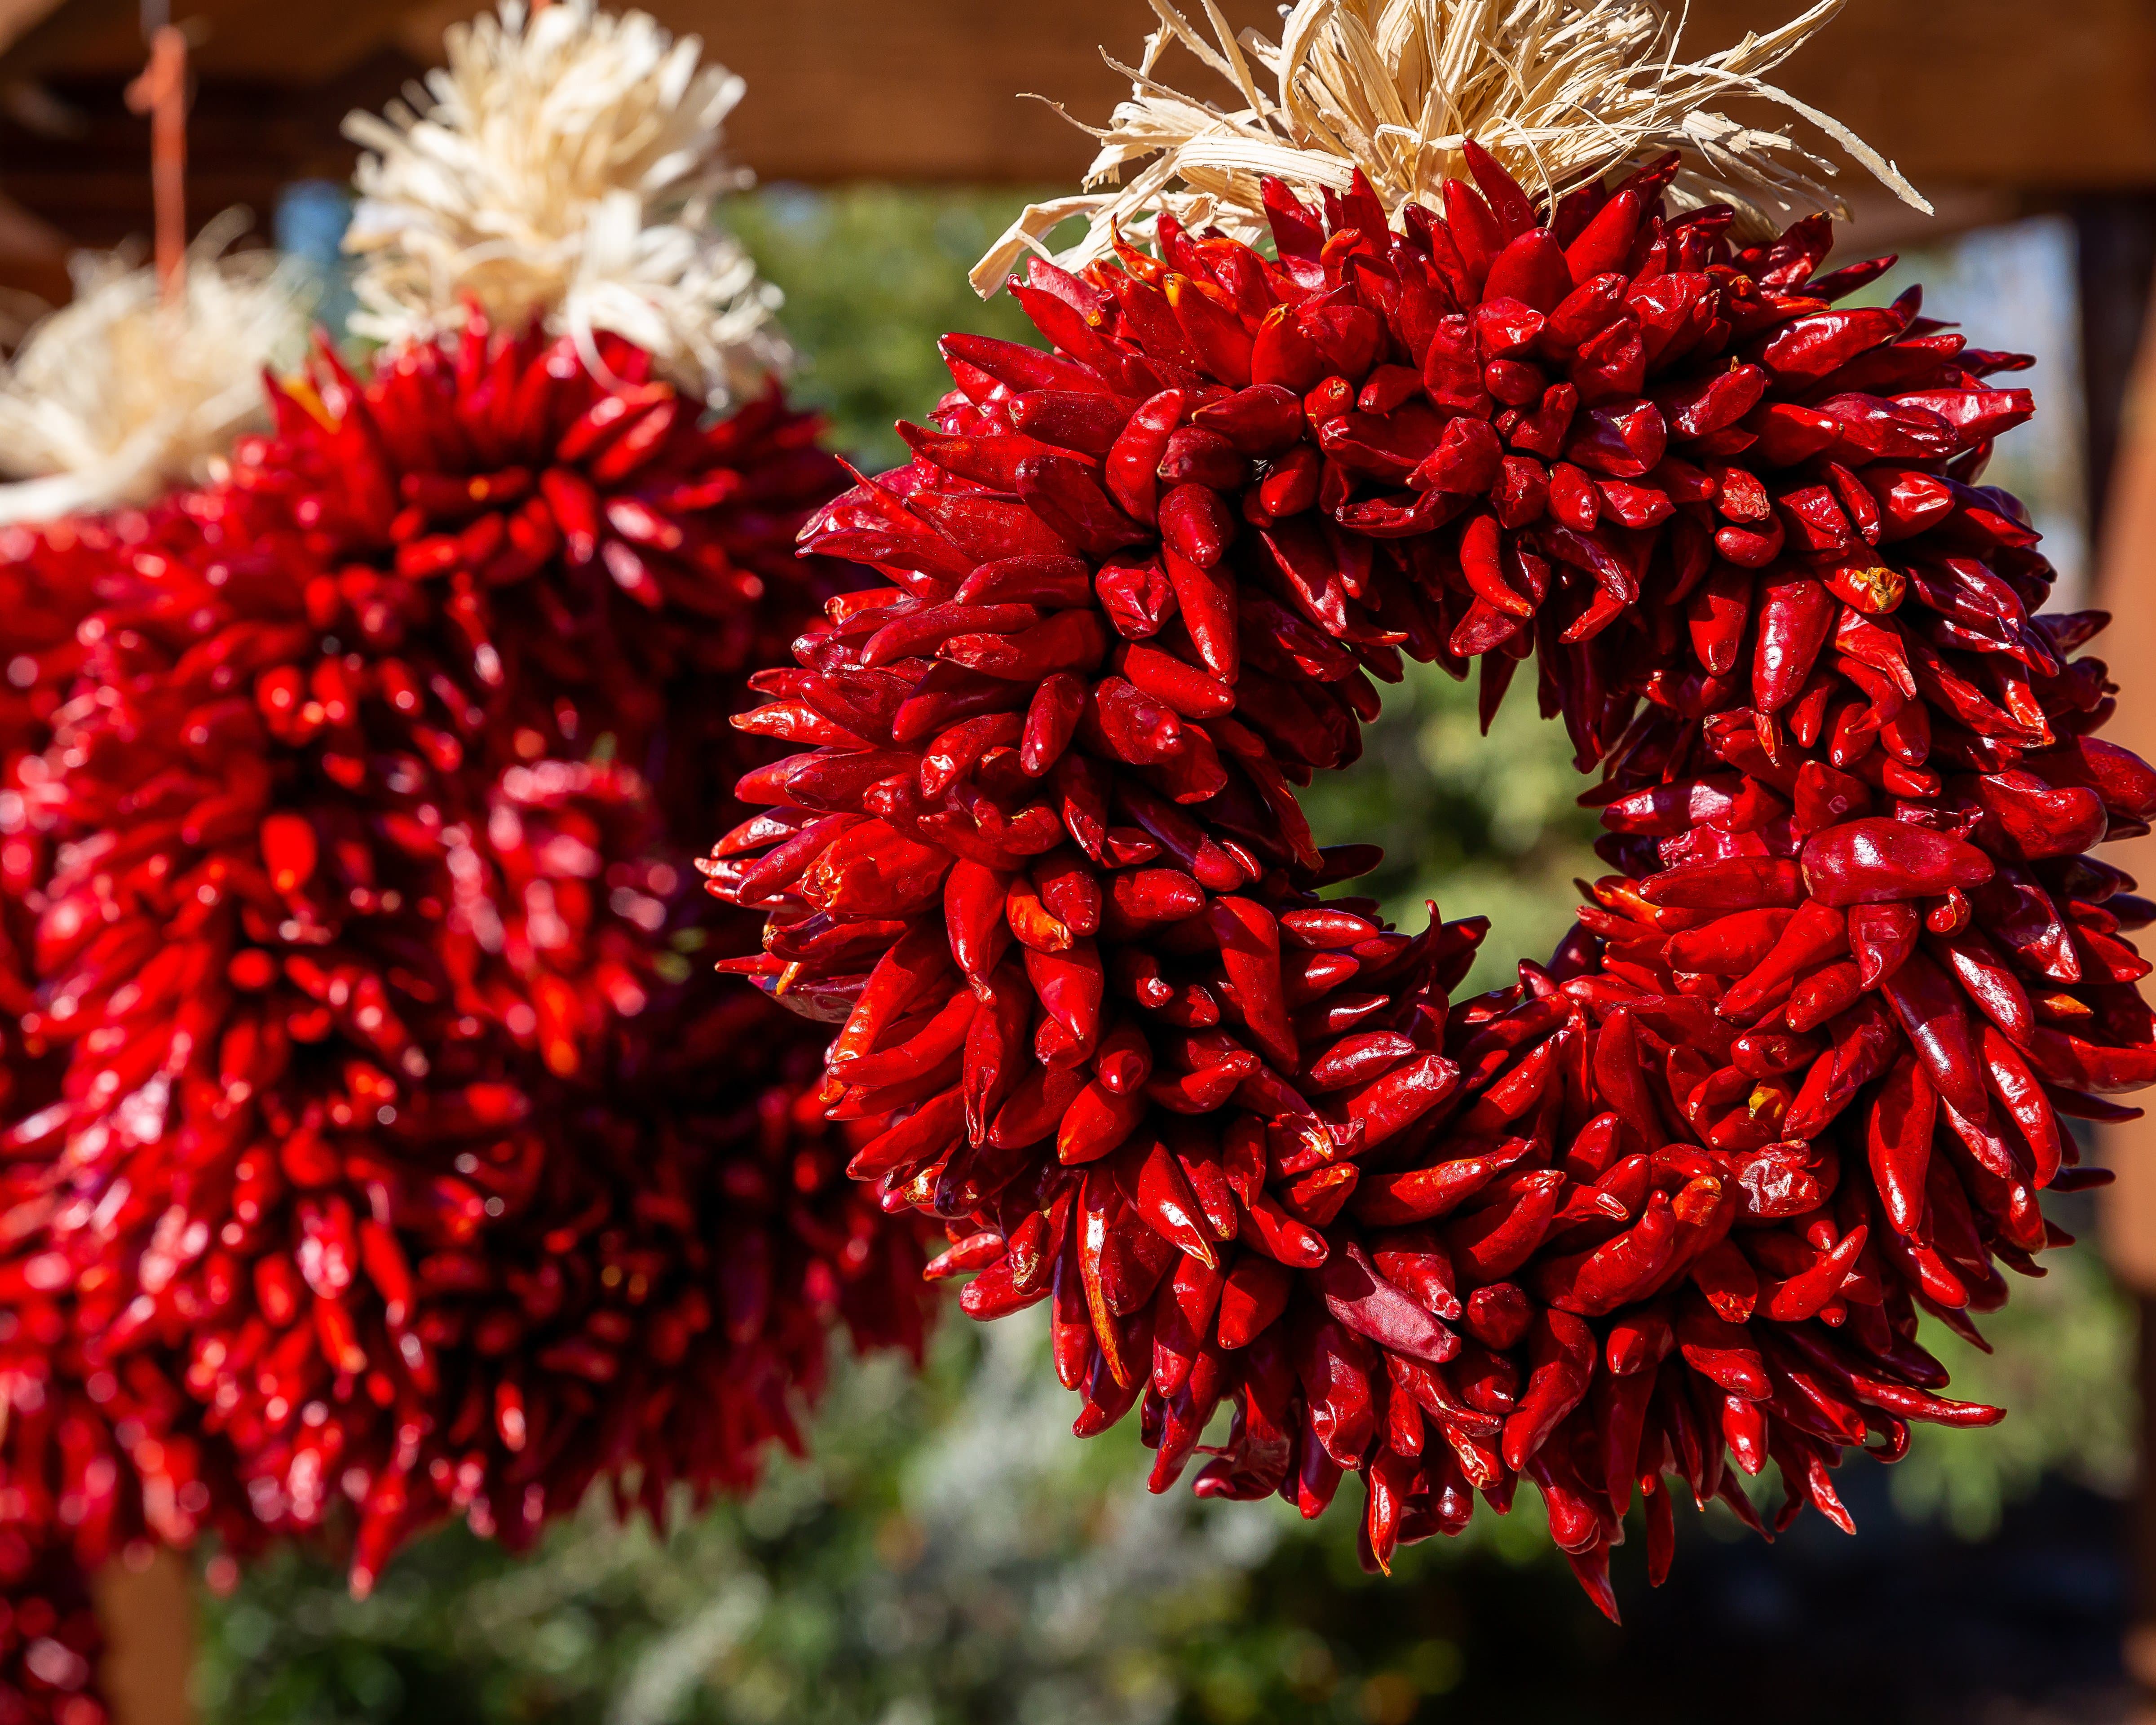 A vibrant image of two hanging hand-made chile pequin wreaths, one in focus in the foreground and another slightly blurred in the background, under natural sunlight.